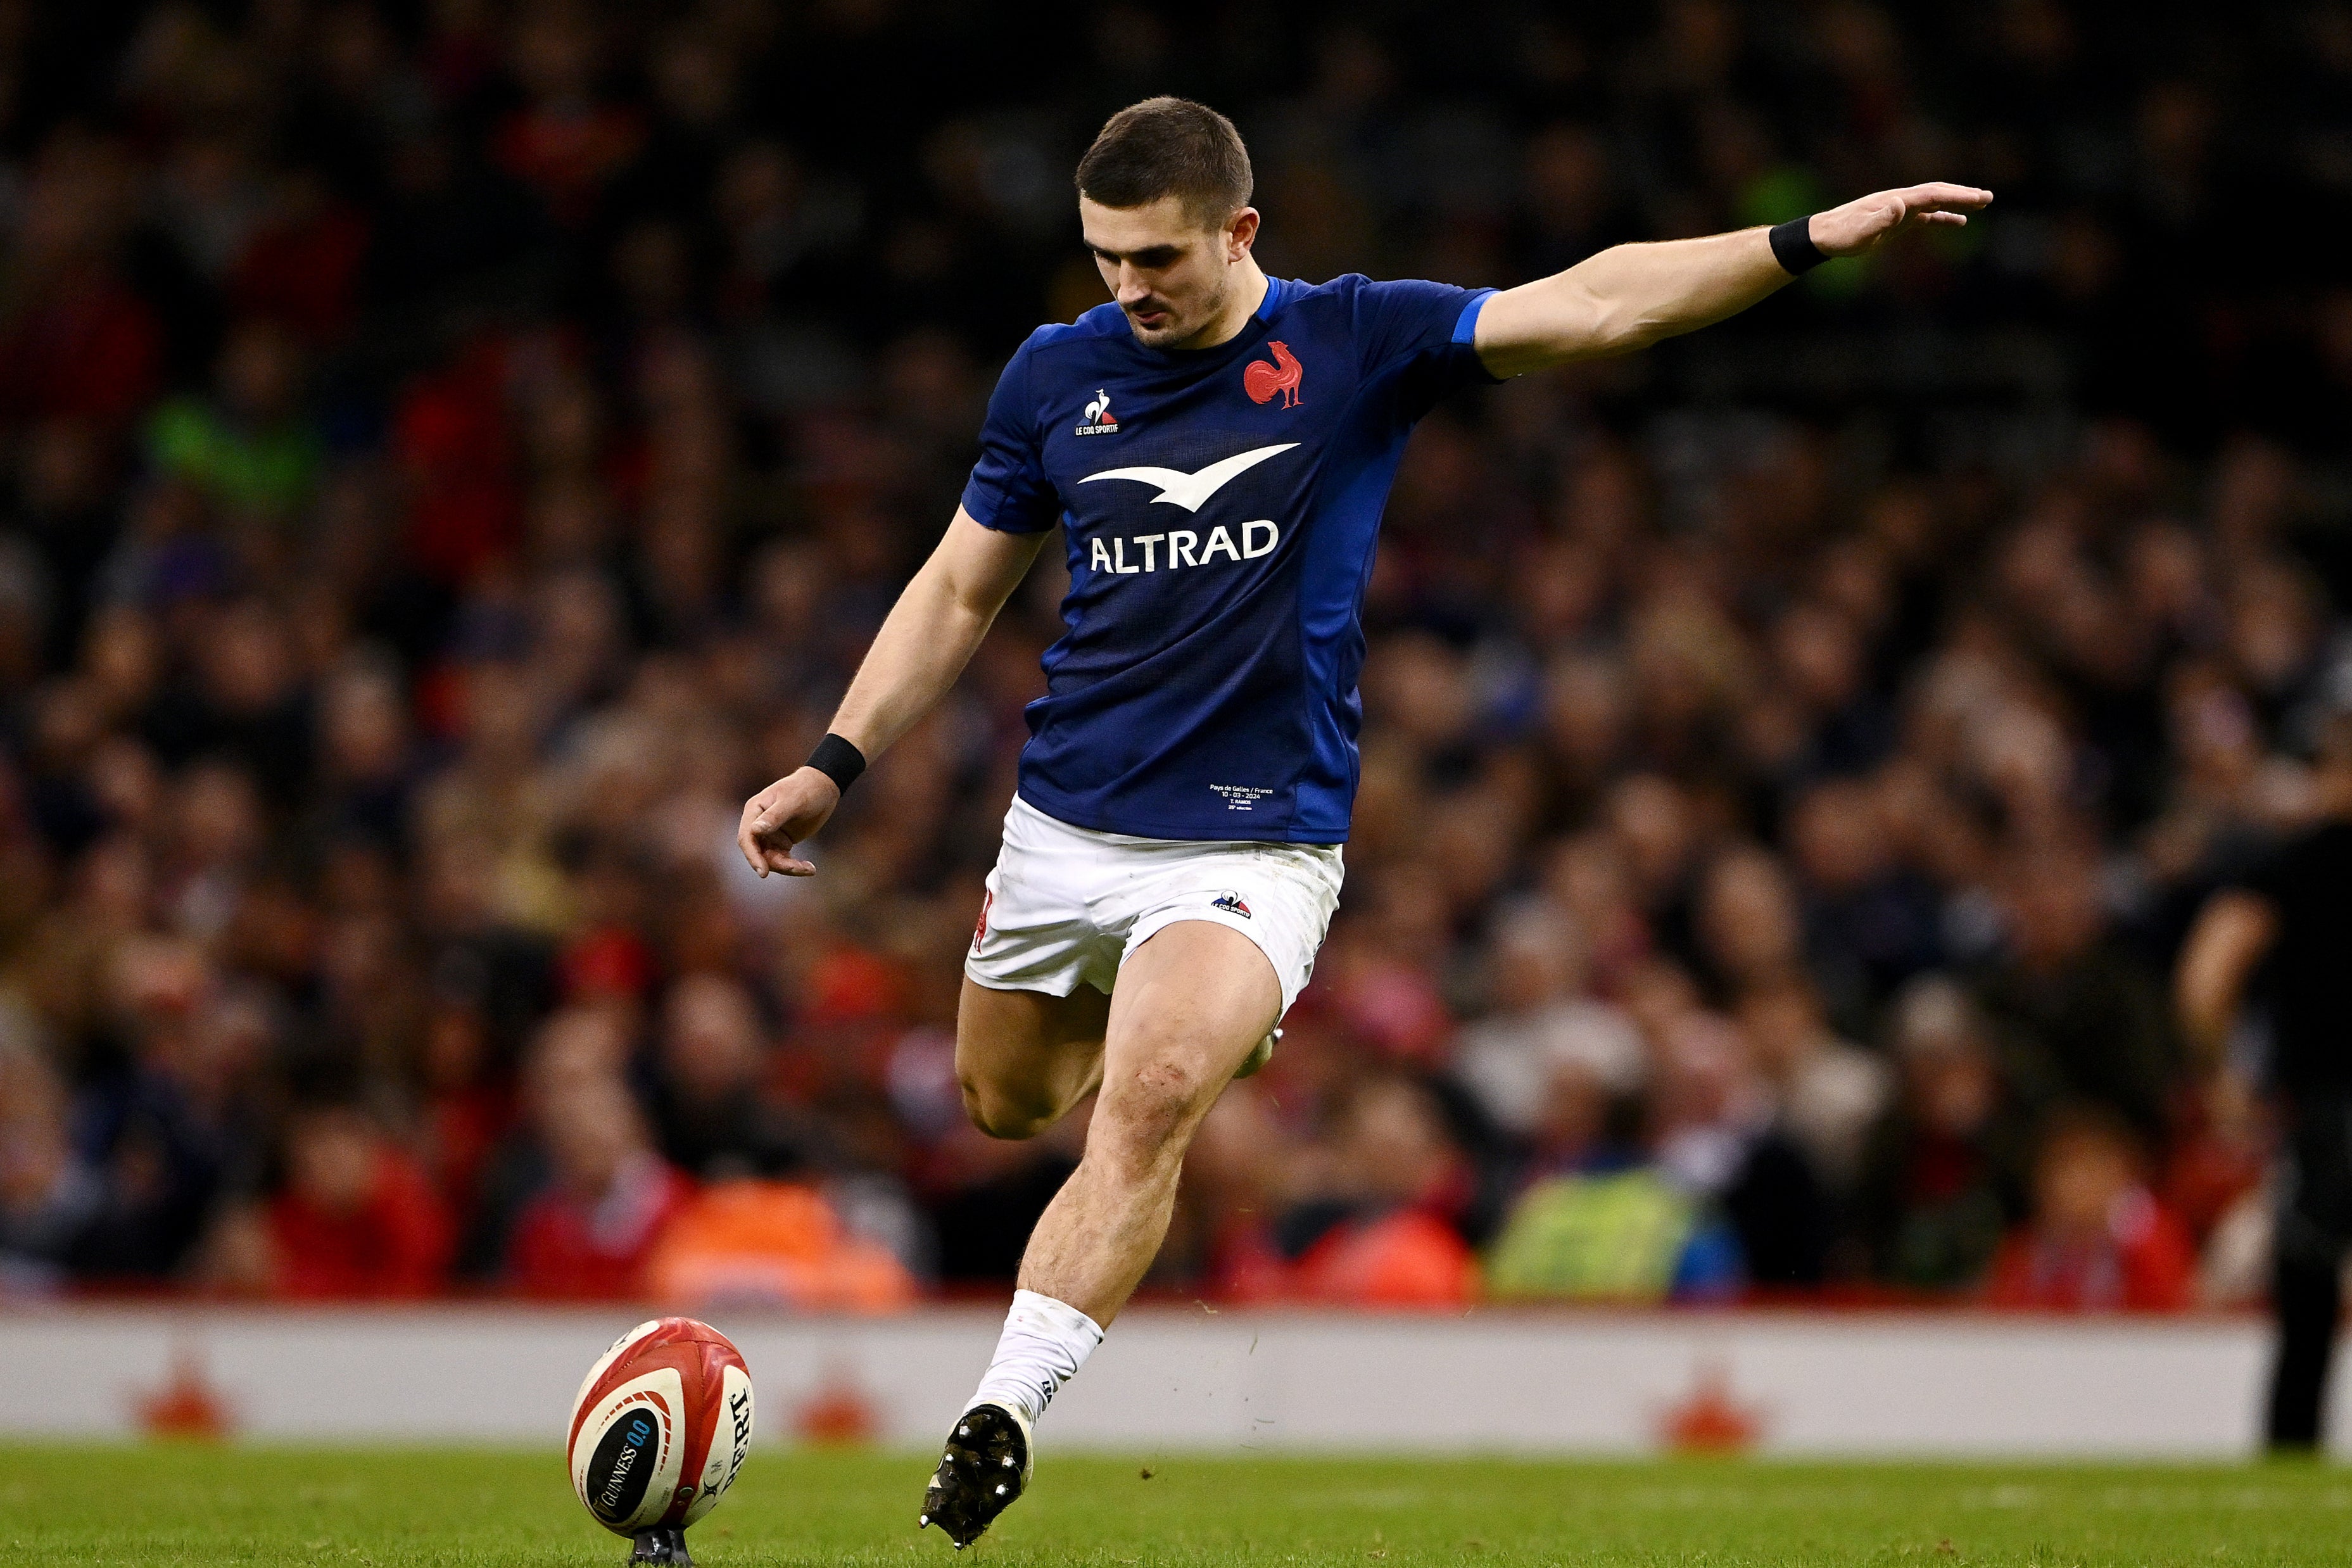 Thomas Ramos kicked well for France against Wales, although struggled at times in defence